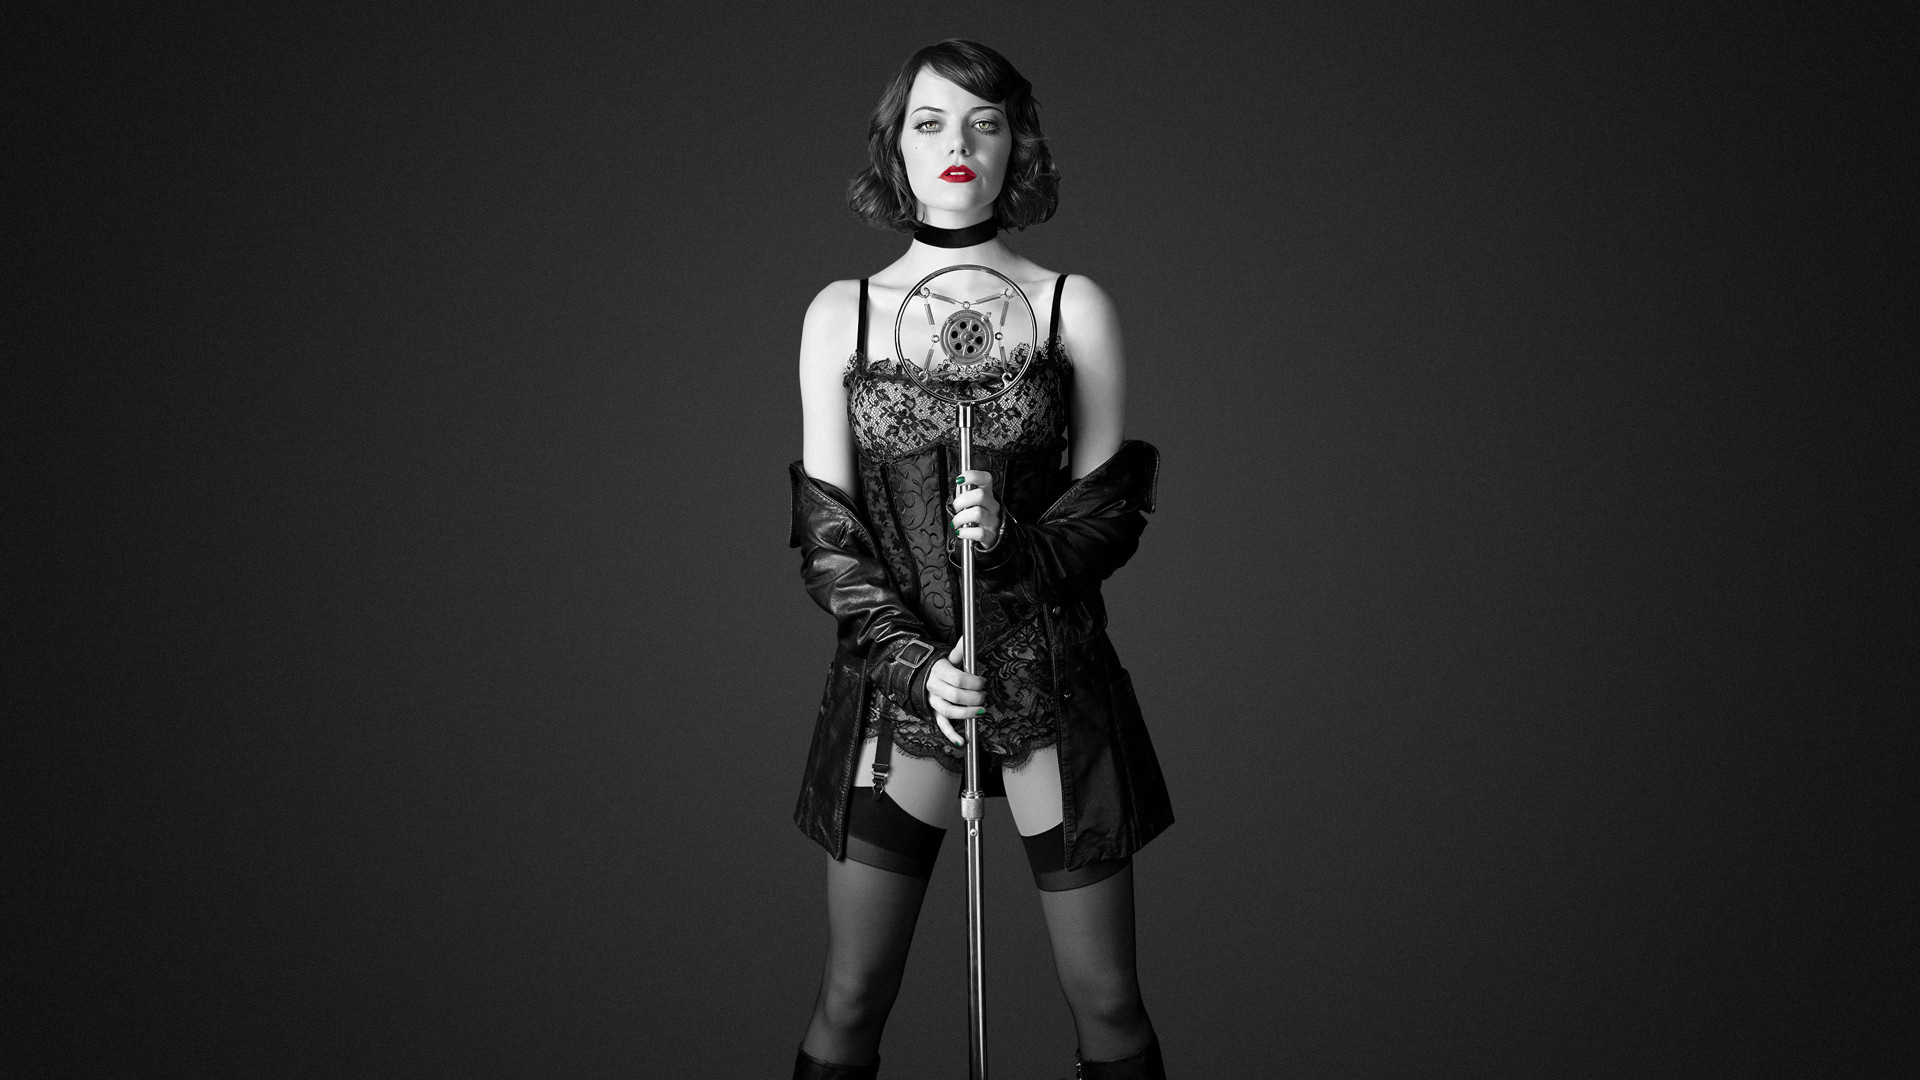 Cabaret: Emma Stone, Monochrome, Burlesque, A floor show of dancing and singing. 1920x1080 Full HD Background.